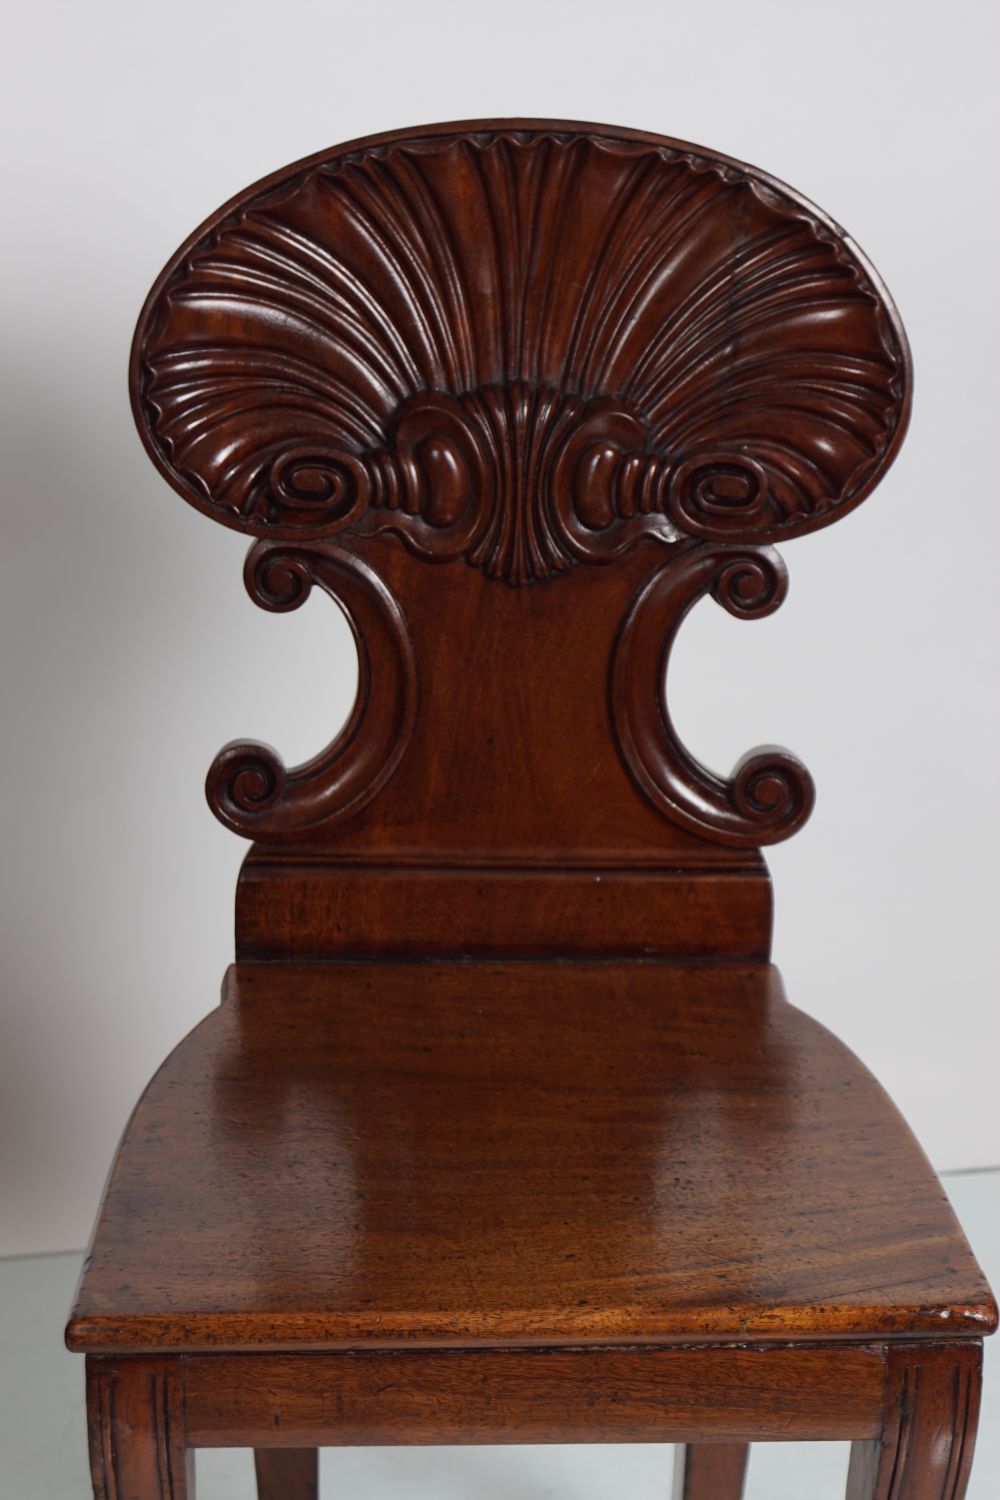 MATCHED PAIR OF WILLIAM IV MAHOGANY HALL CHAIRS - Image 2 of 3